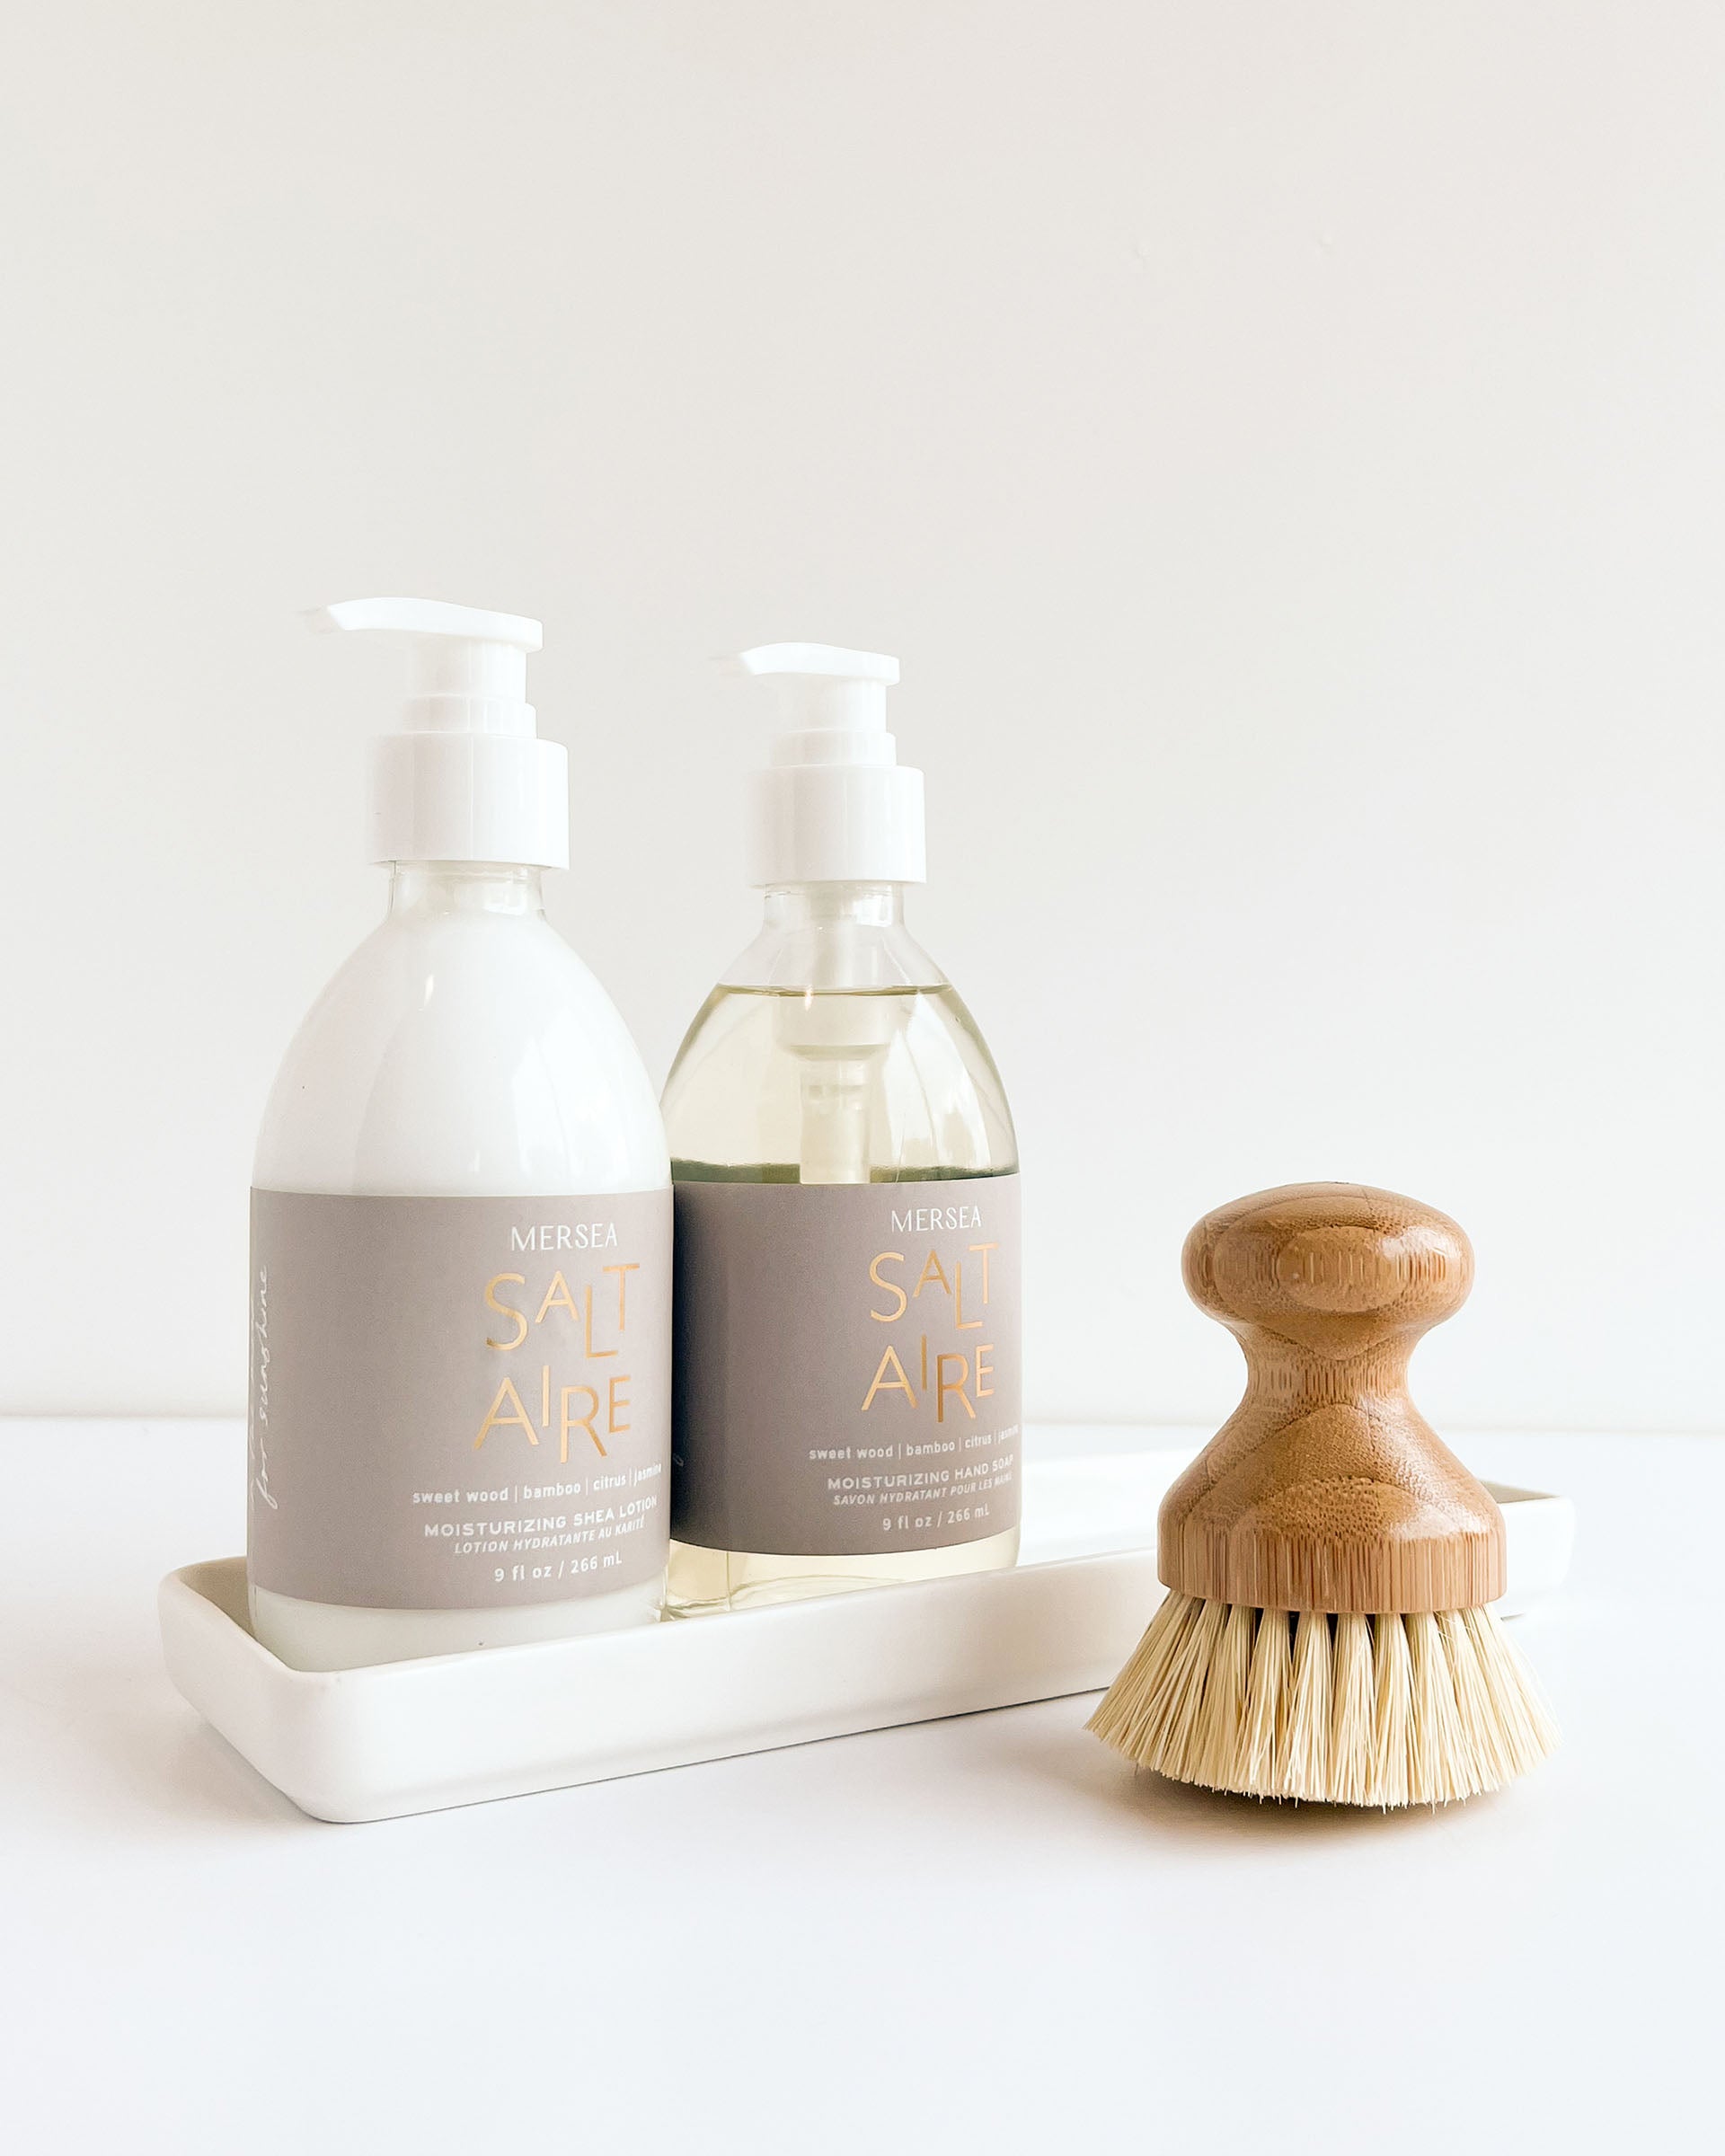 saltaire hand soap shea lotion and brush laying on a white background with tray